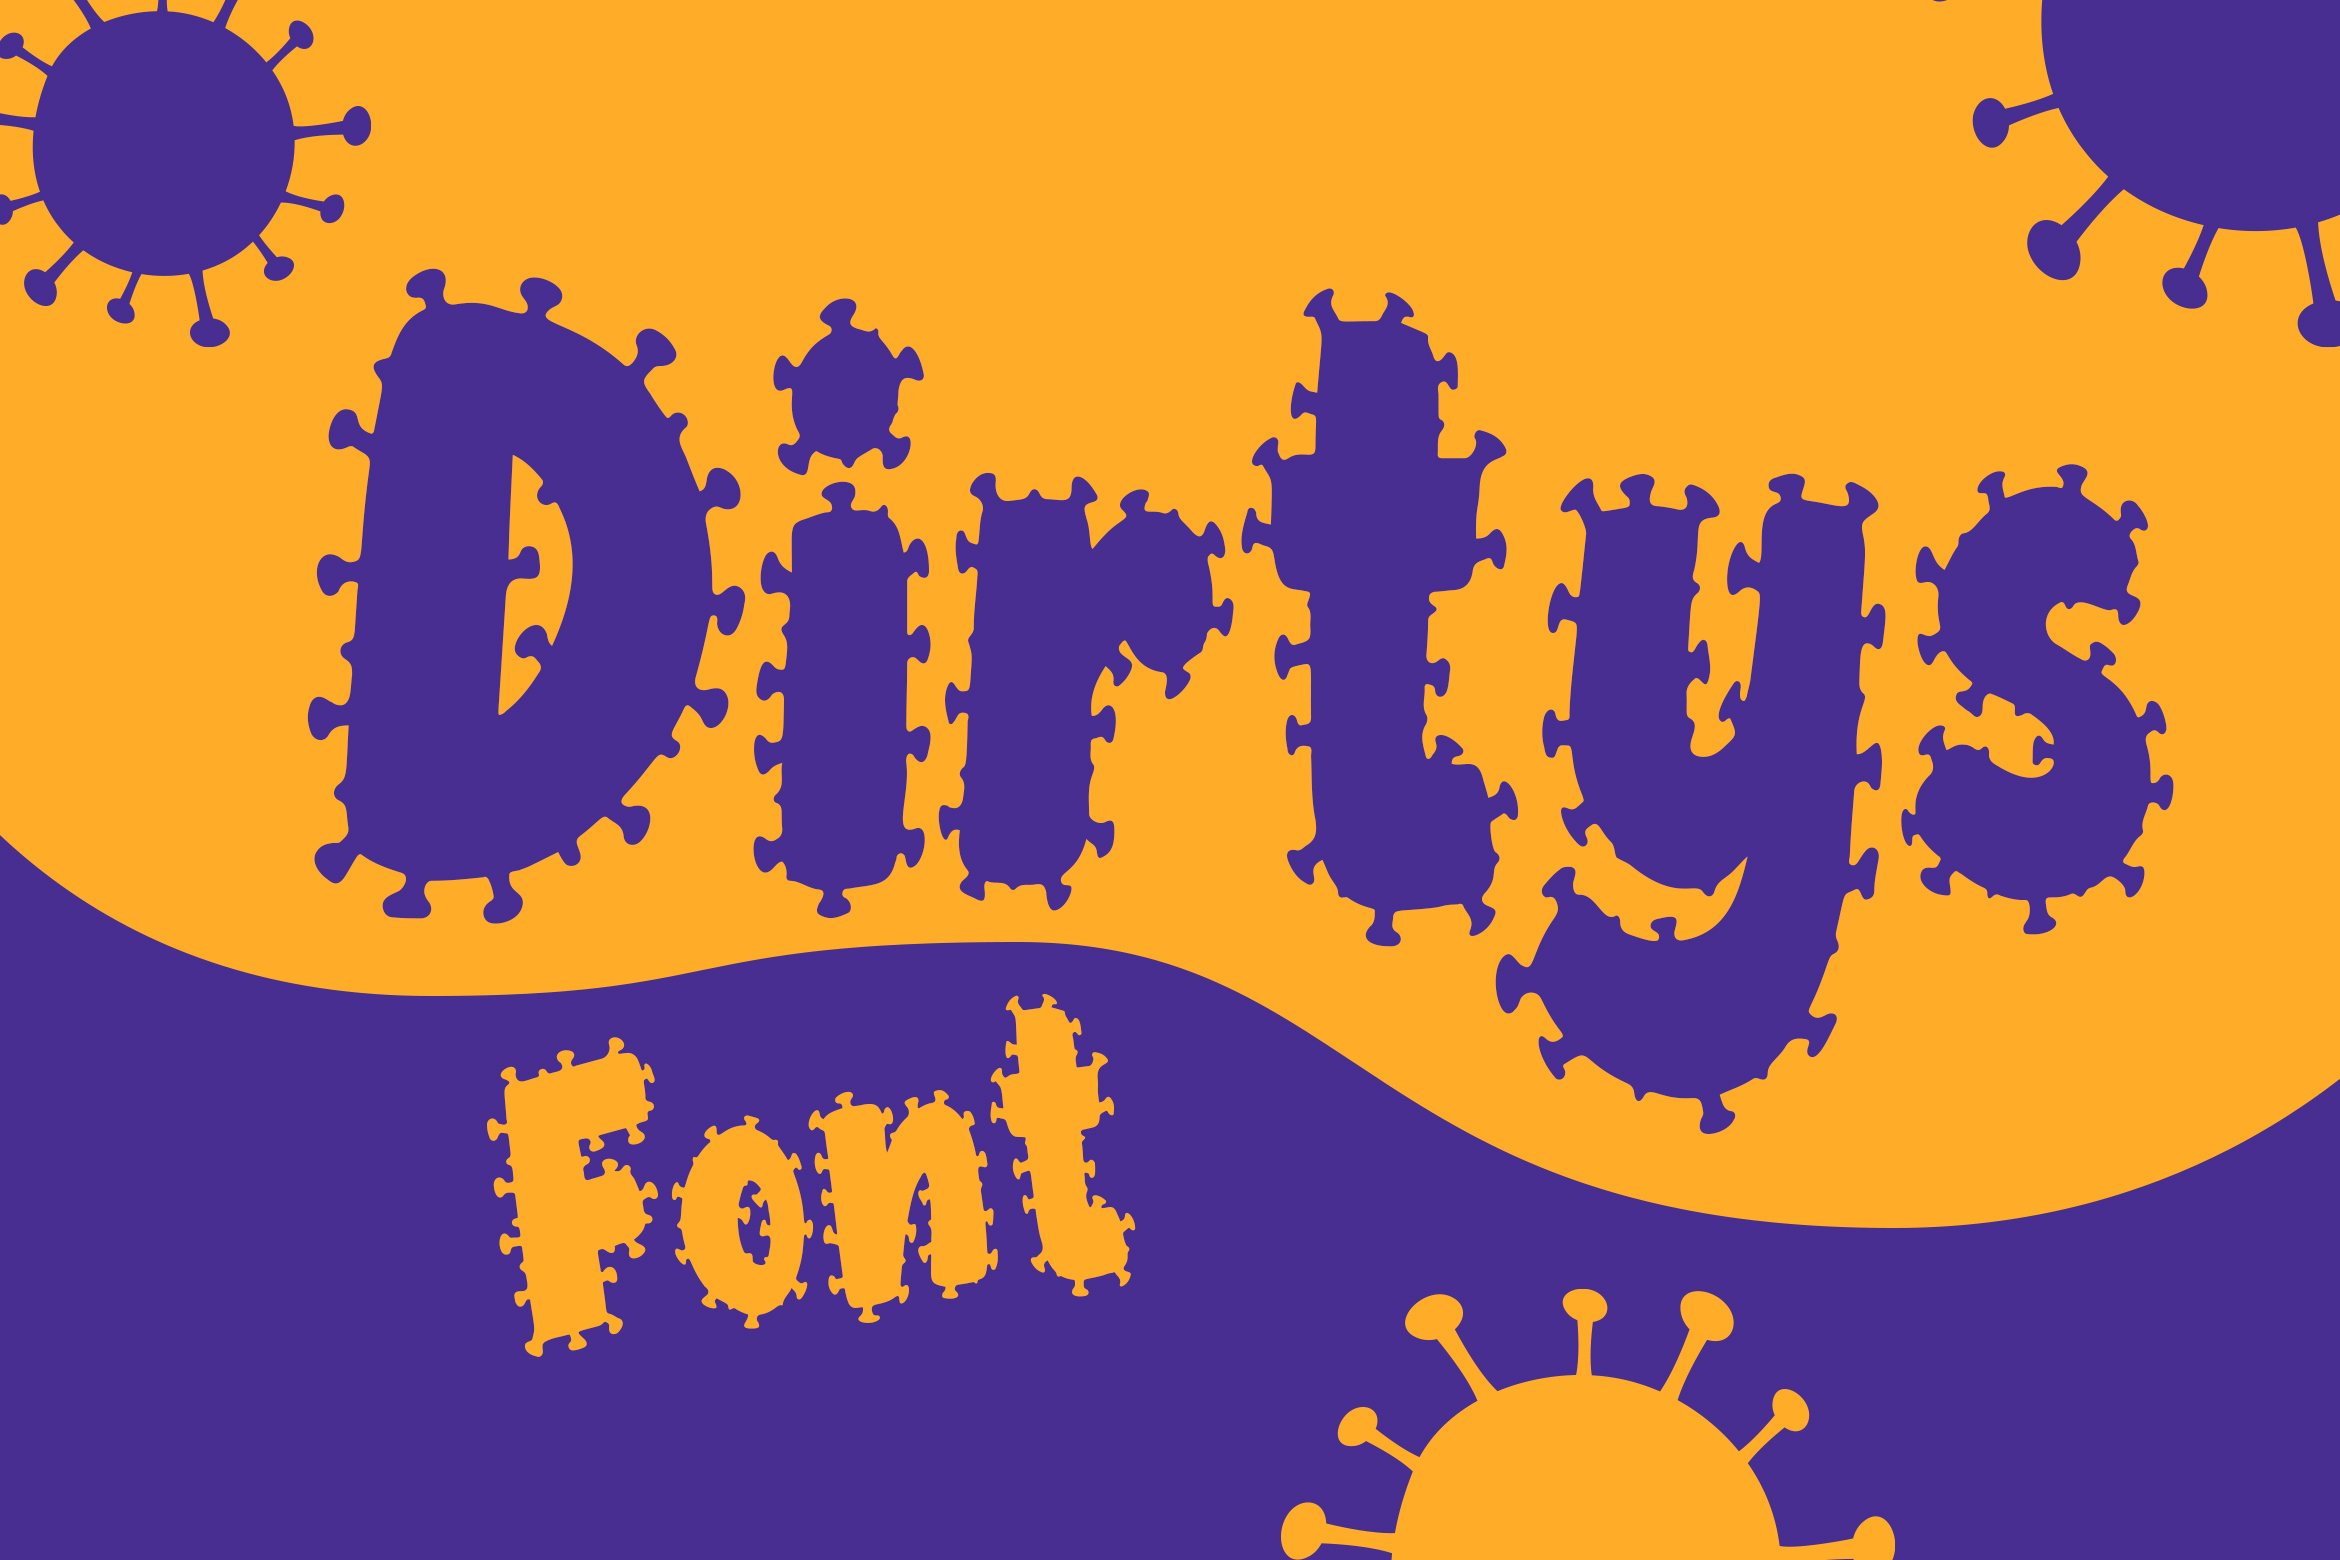 Dirtys Font cover image.